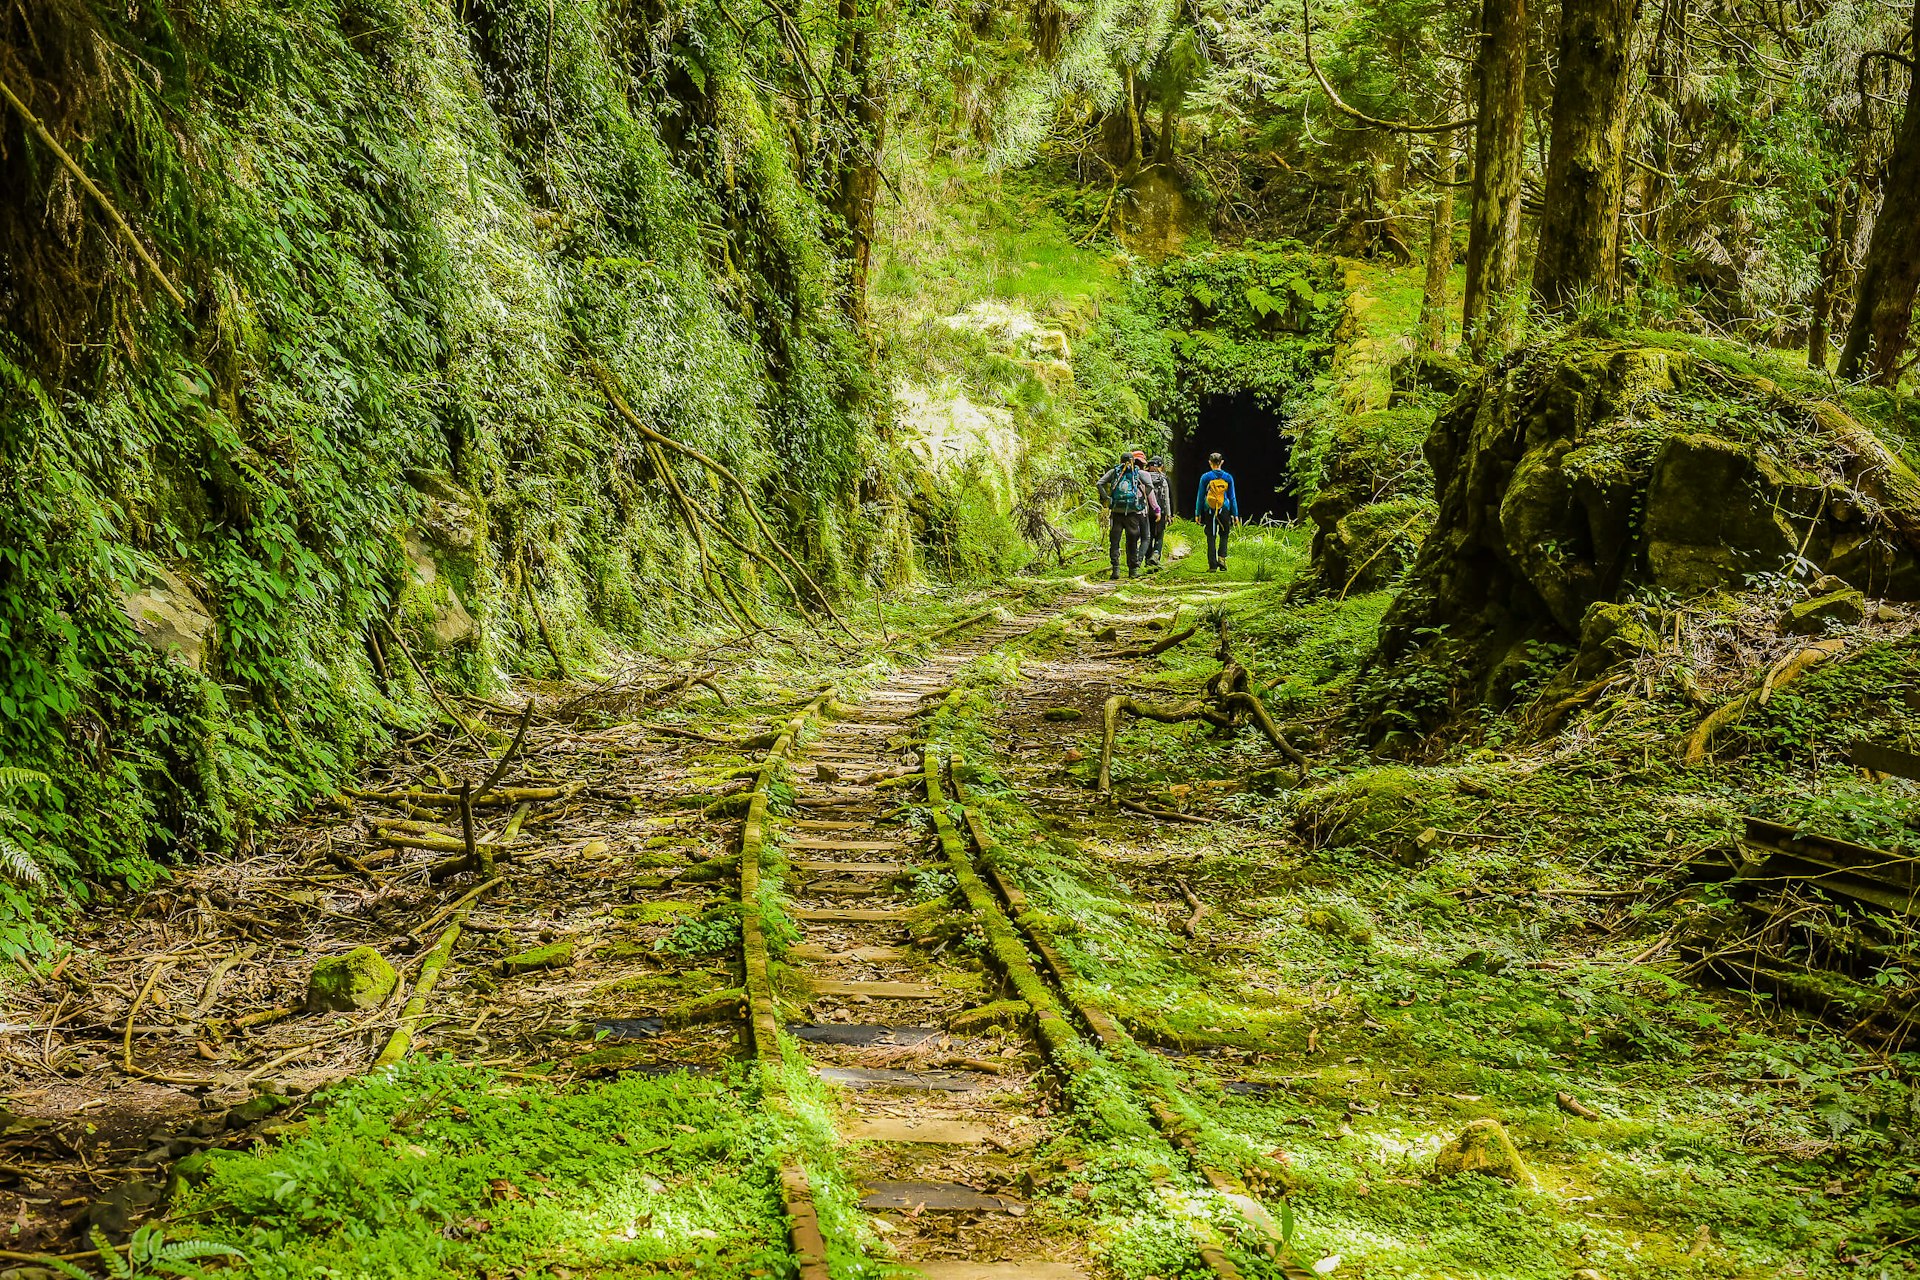 Hikers through an overgrown forest toward an abandoned tunnel on the Mianyue Line Trail at Alishan Forest Railway, Alishan National Scenic Area